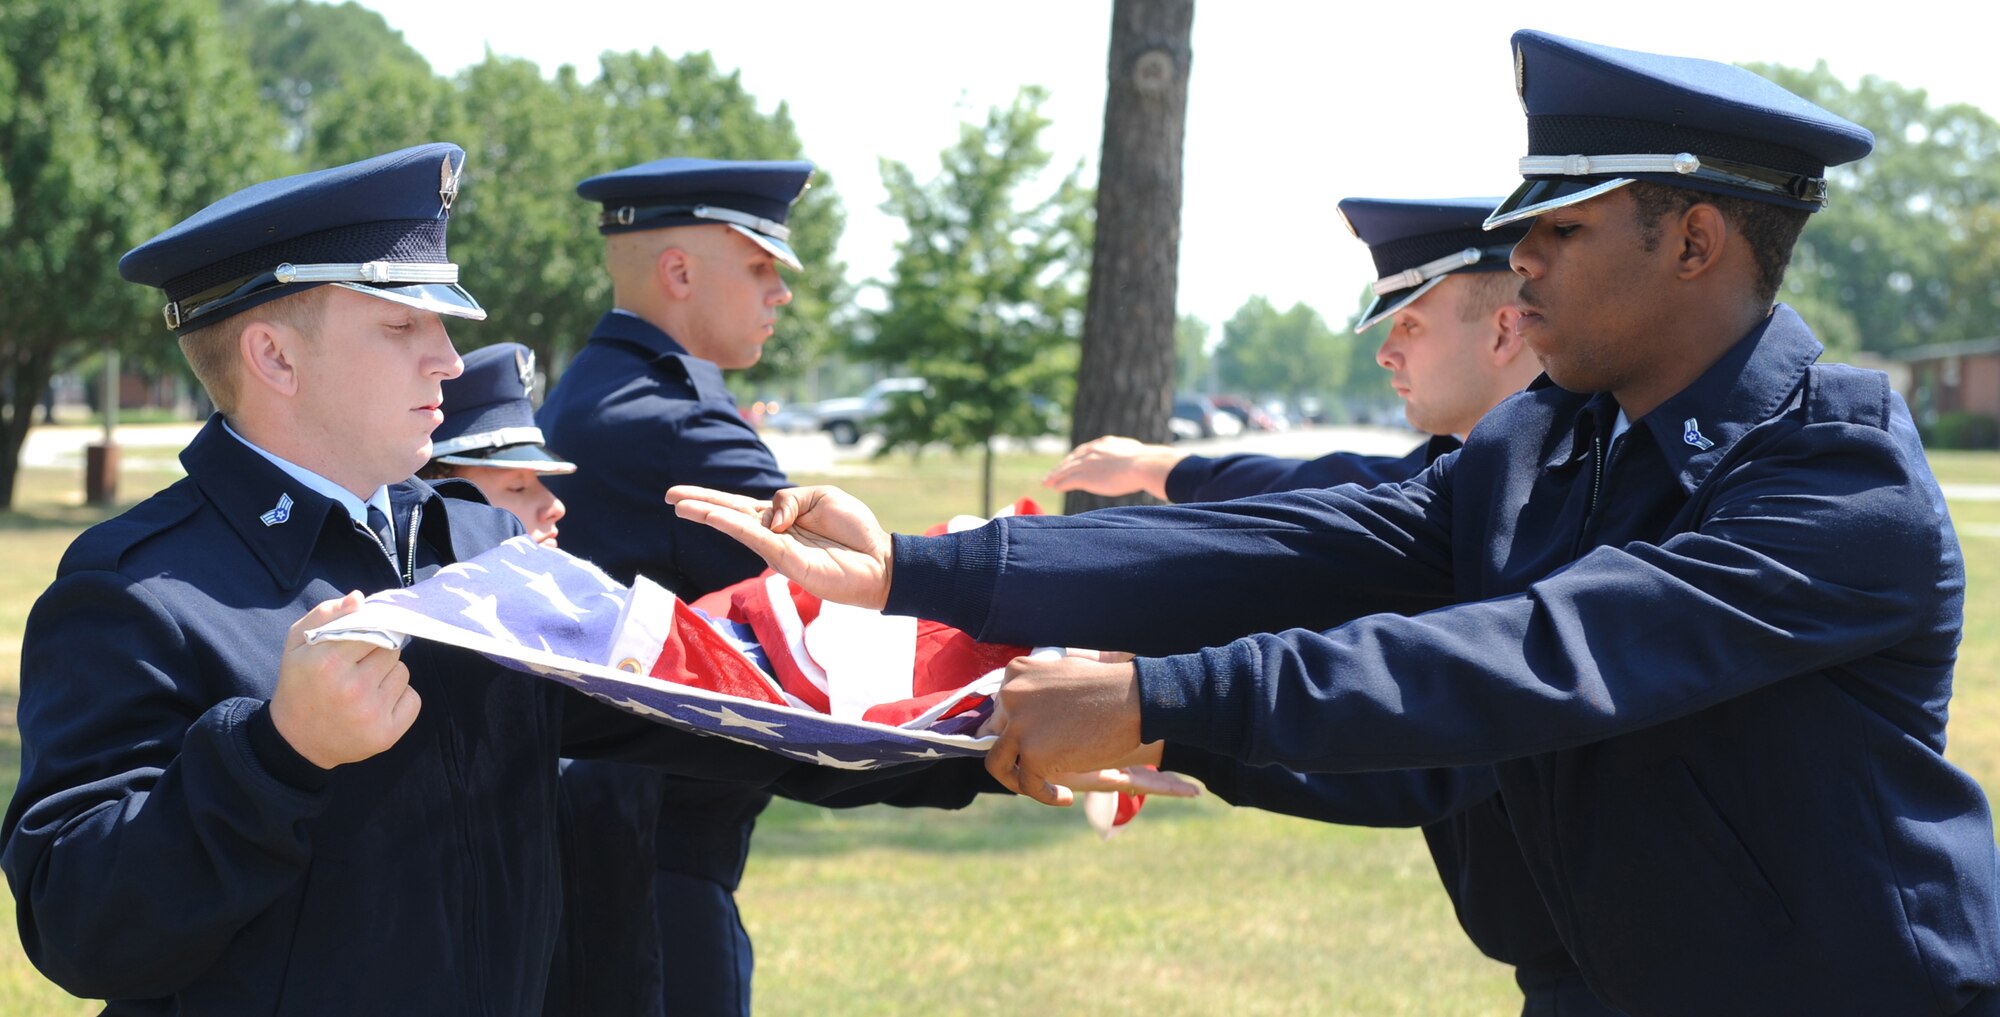 SEYMOUR JOHNSON AIR FORCE BASE, N.C.- Base honor guard members, Staff Sgt. Richard Allen, Senior Airman Tiffany Legree, Airman 1st Class Jason Hochsprung,  Senior Airman Houston Kirkeide, Airman 1st Class Joseph Perry, Airman 1st Class Marcus Smith hold the flag high with pride while folding on June 24. The folding of the flag renders respect to the servicemember that passed. (U.S. Air Force photo by Airman 1st Class Whitney Stanfield)